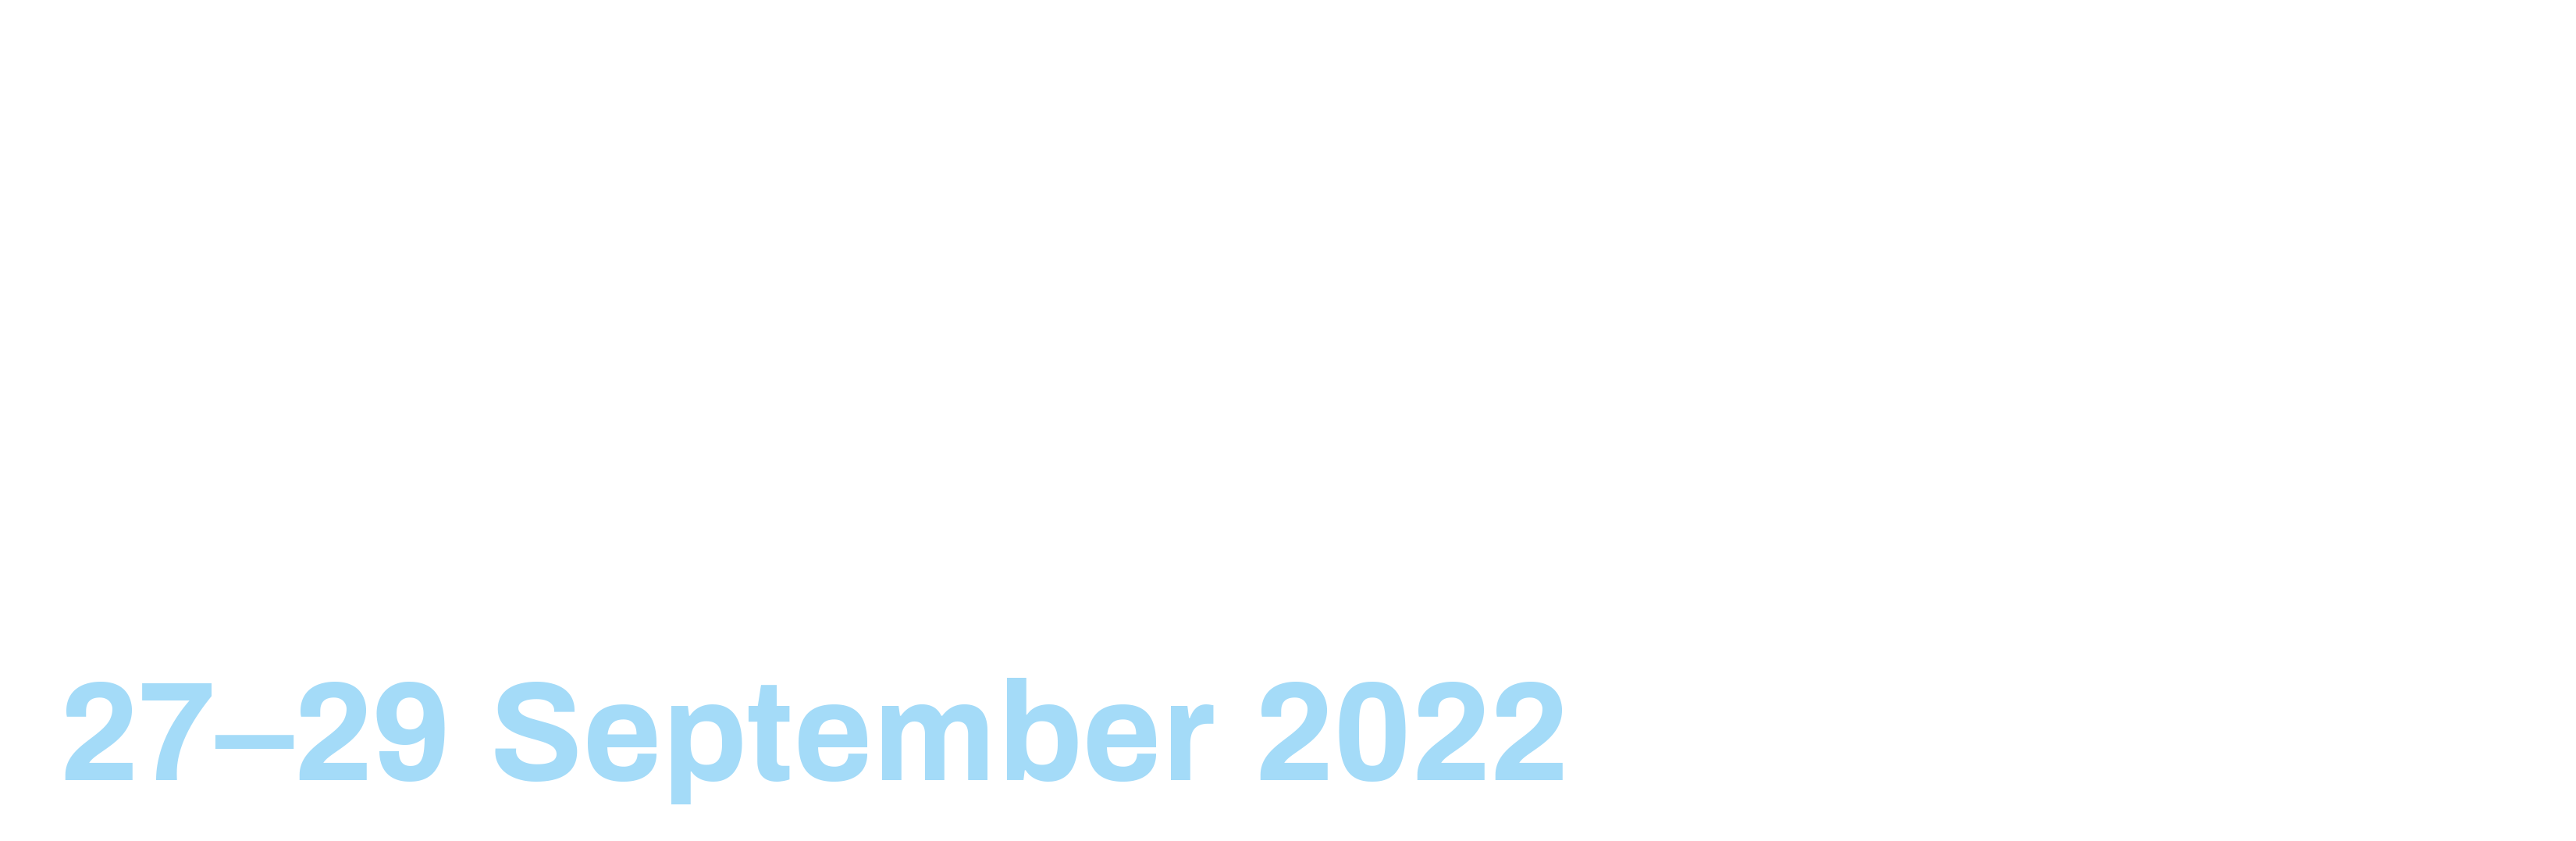 Fundraising Convention 2022